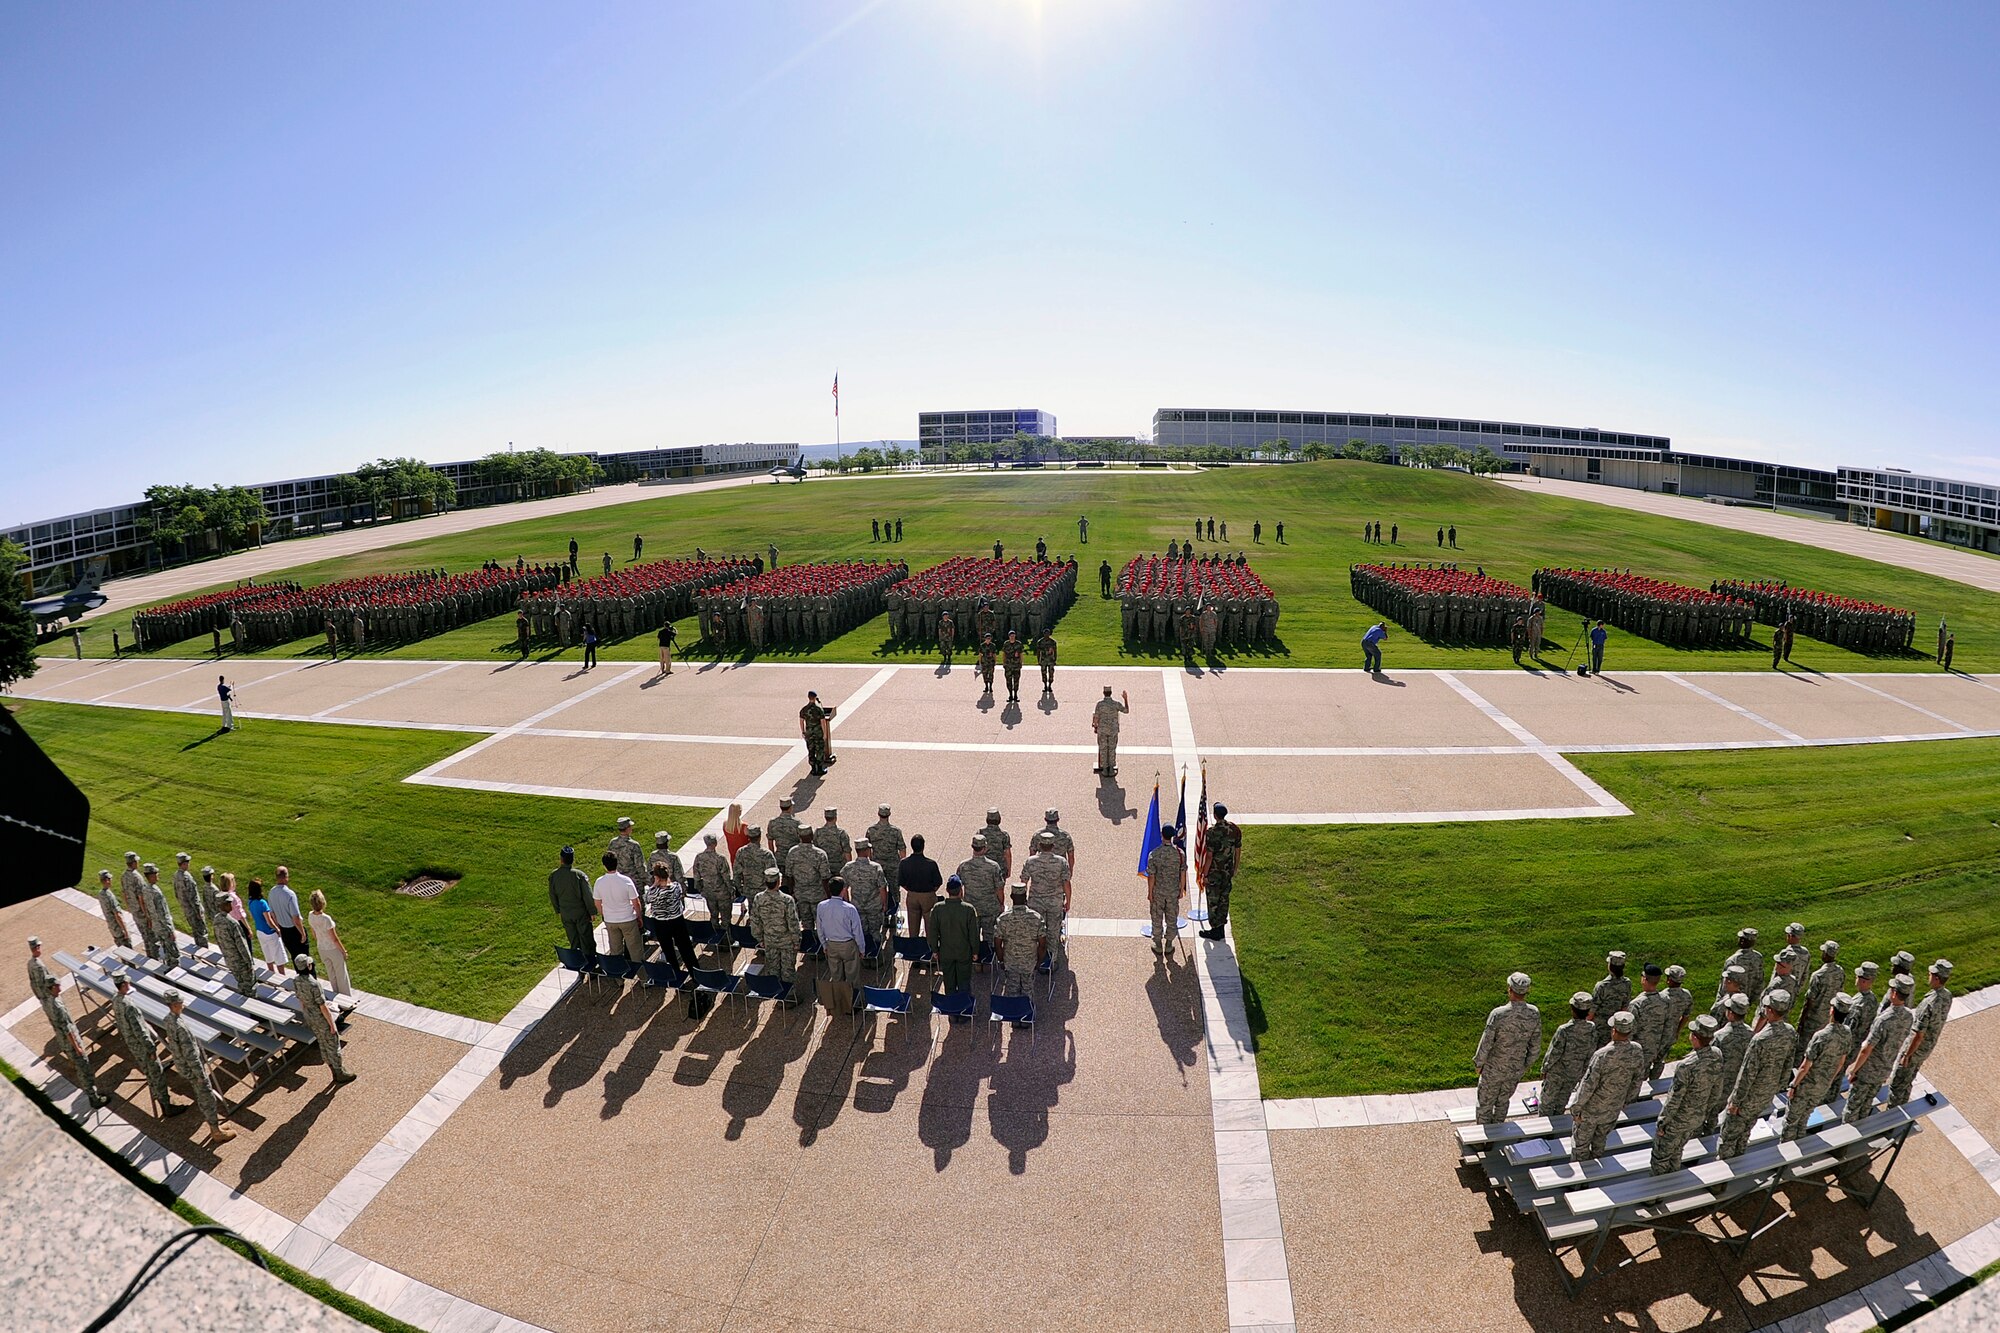 Brig. Gen. Sam Cox, center, administers basic cadets' oaths of allegiance during a swearing-in ceremony at the Air Force Academy in Colorado Springs, Colo., June 25, 2010. General Cox is the Academy commandant of cadets, responsible for more than 4,000 cadets' military training and airmanship education, supervising cadet life activities and supporting facilities and logistics. (U.S. Air Force photo/Mike Kaplan)